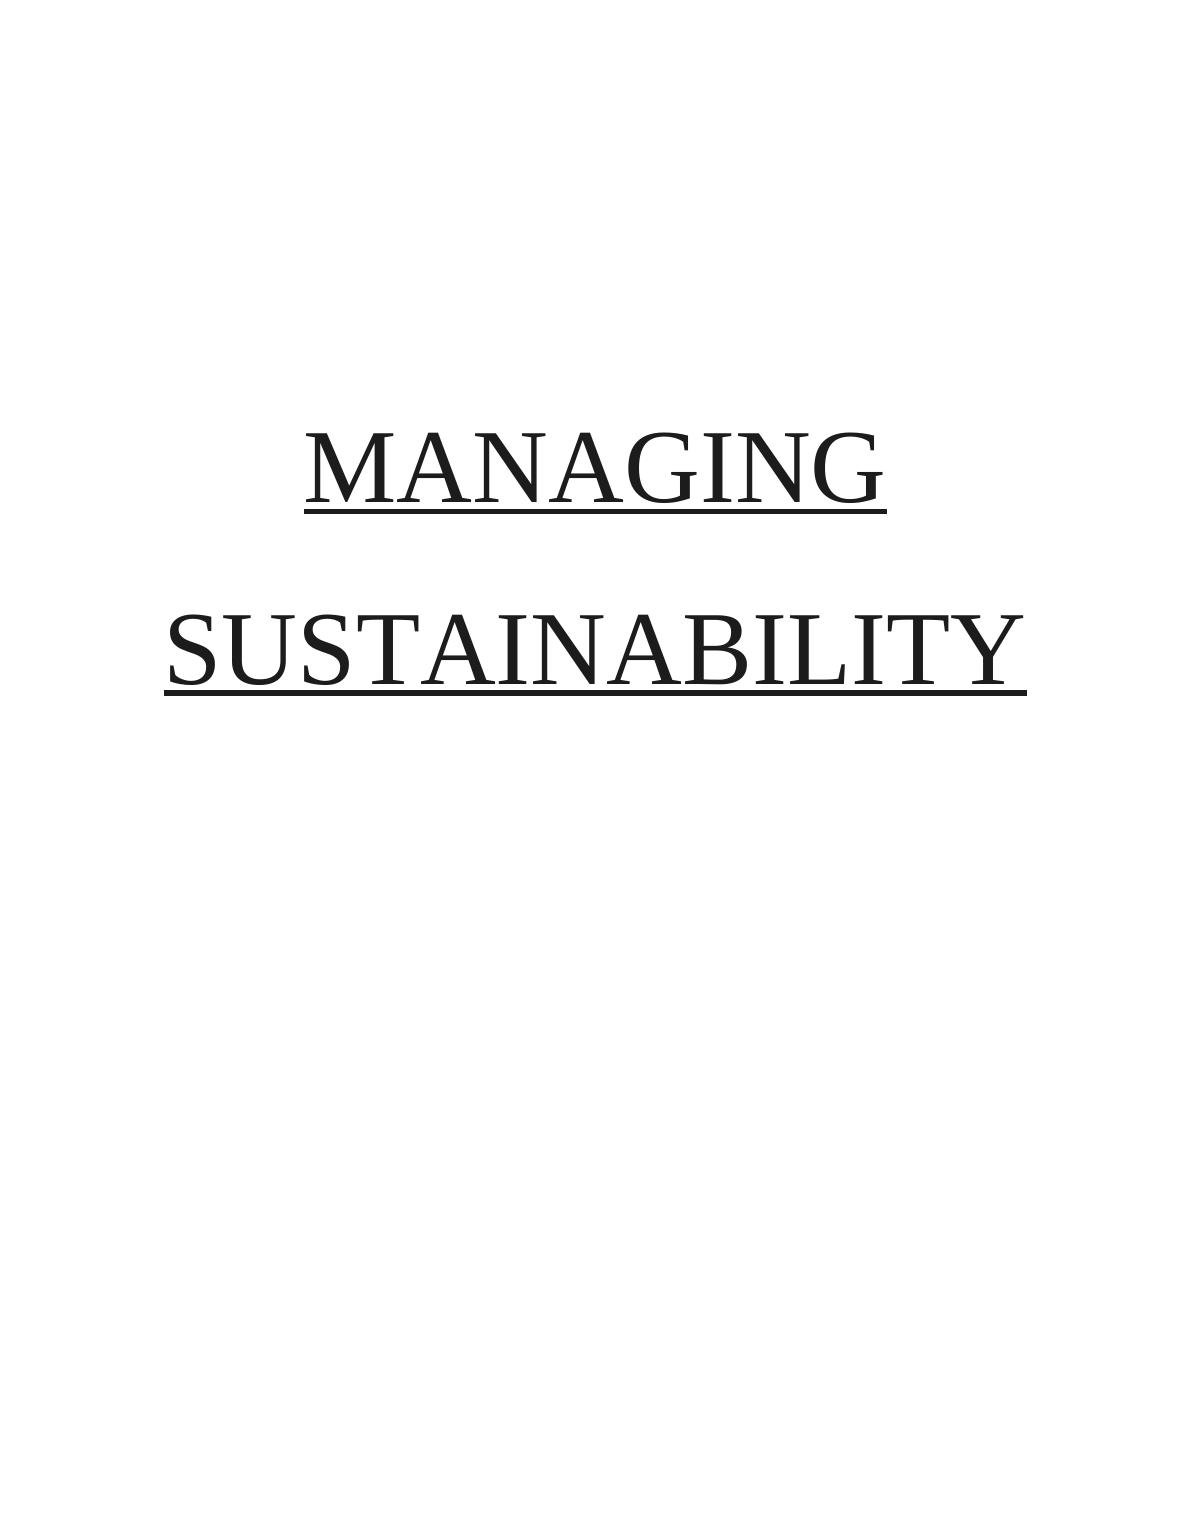 Managing Sustainability Assignment_1